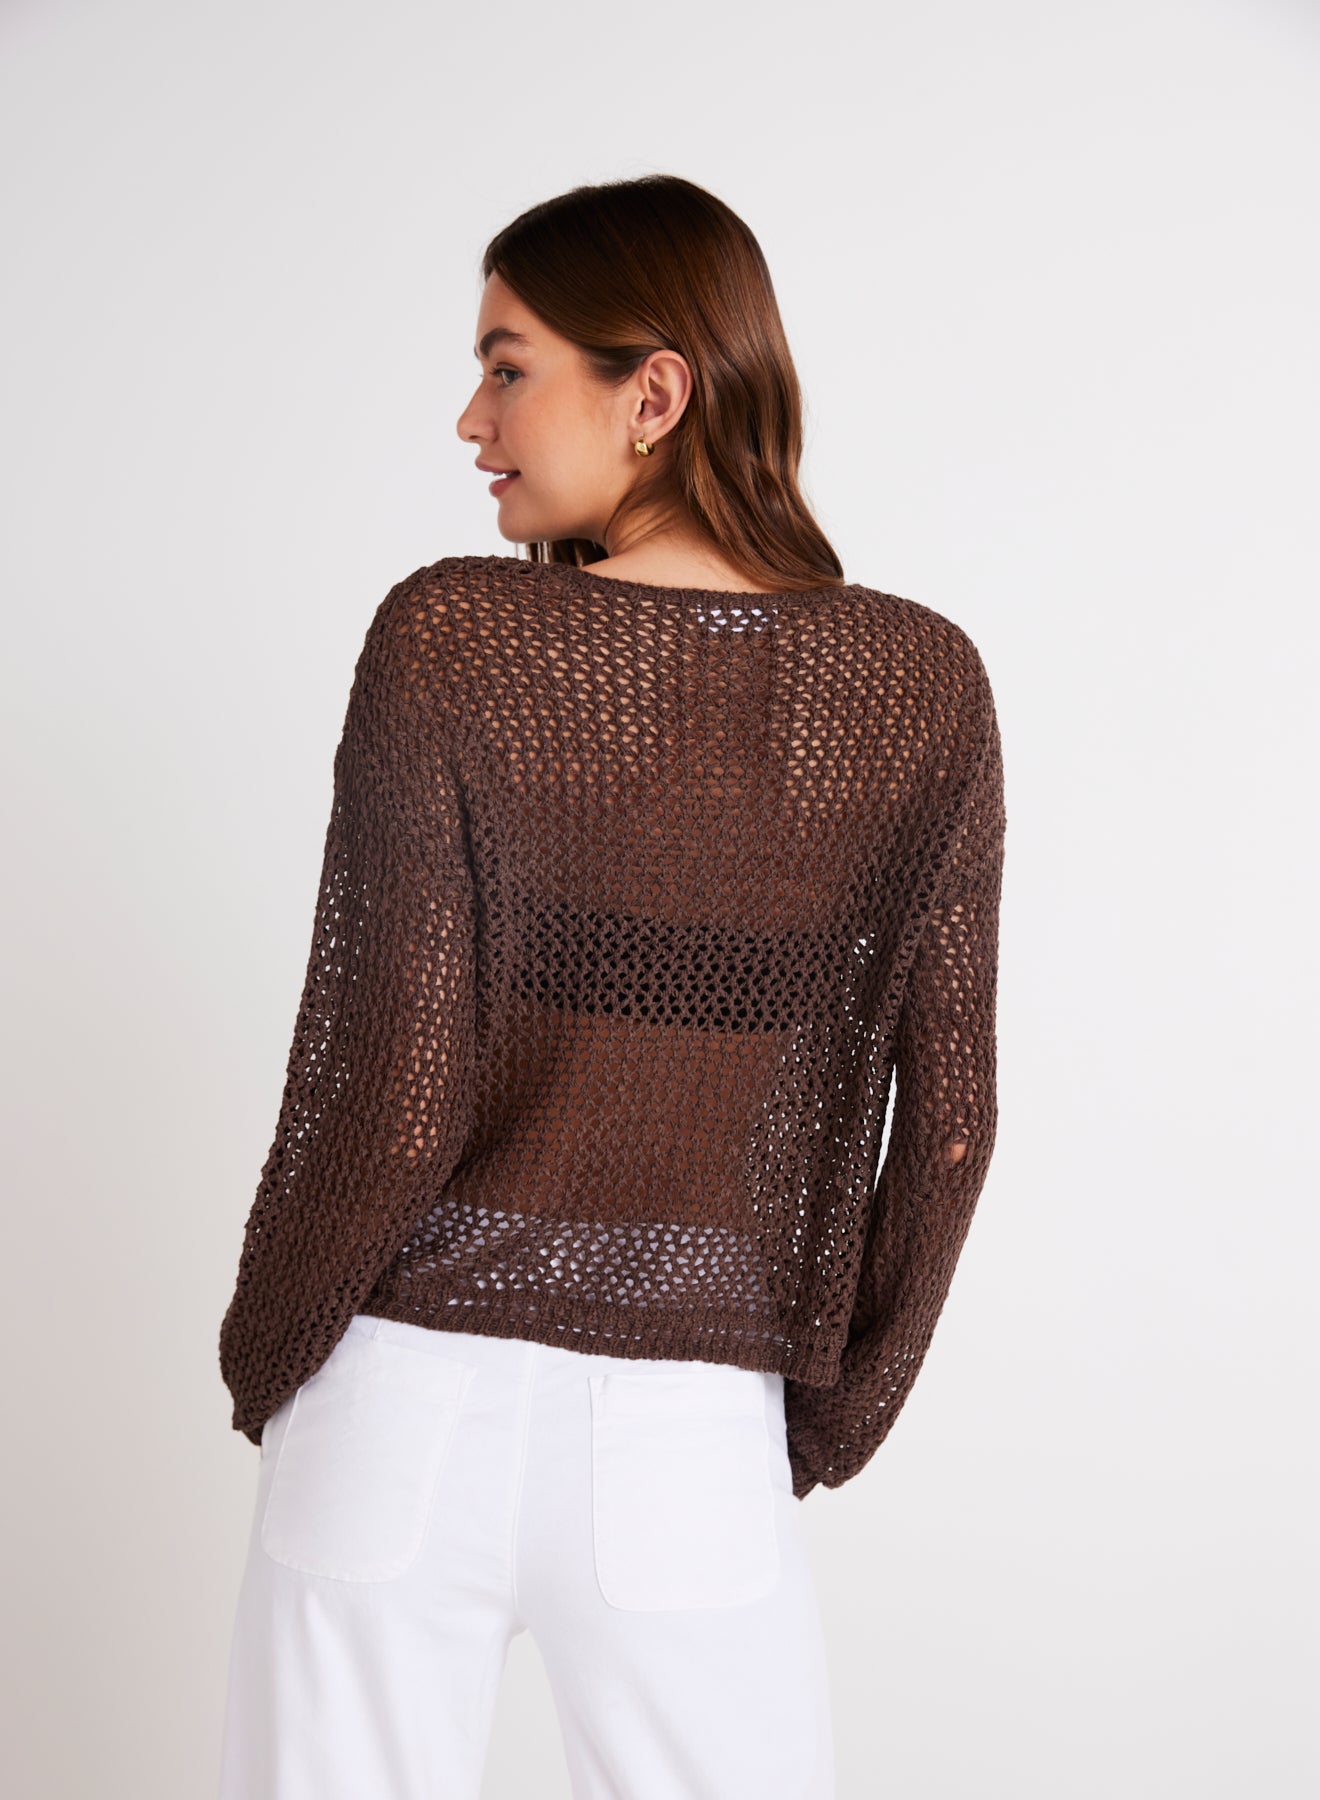 Relaxed Shoulder Sweater